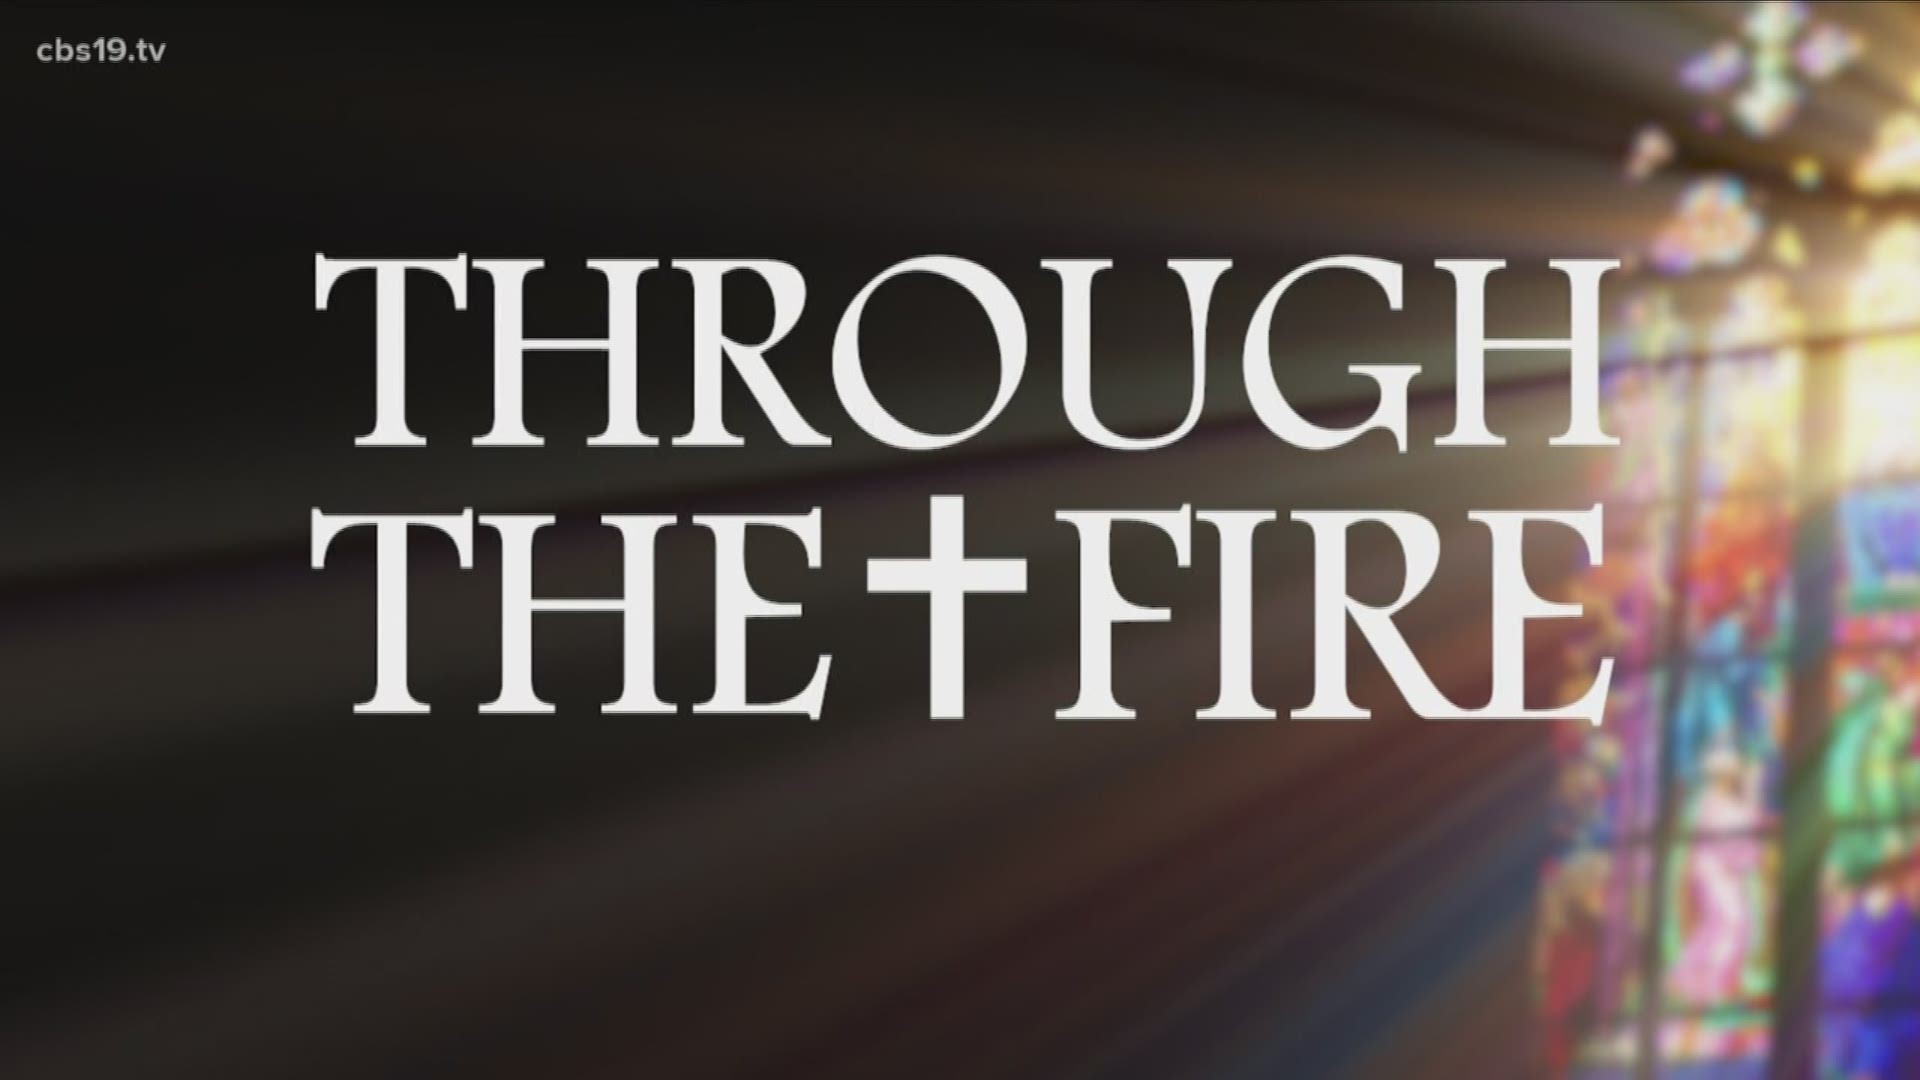 In 37 days, 10 church fires broke out across East Texas. We remember the fires 10 years later and the investigation that brought those responsible to justice.